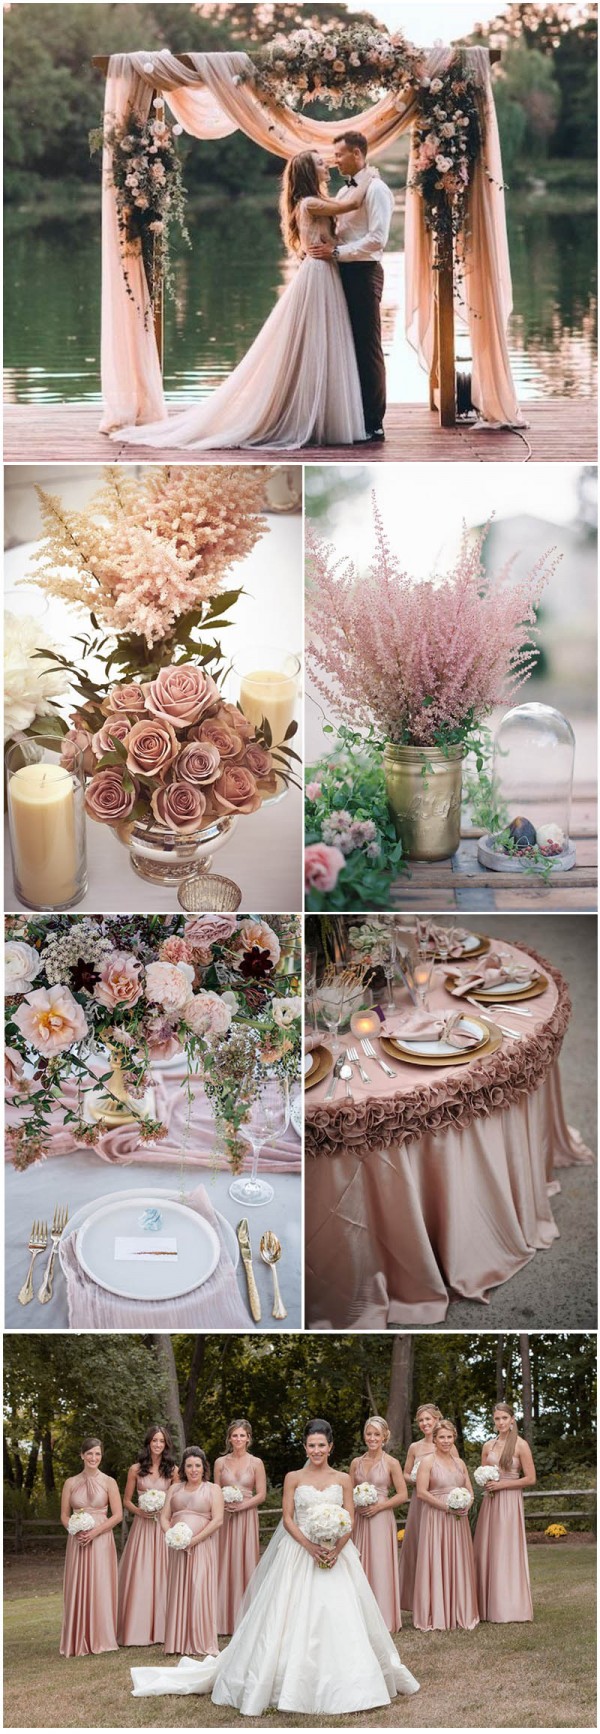 18 Romantic Dusty Rose Wedding Color Ideas for 2019 Weddings - Page 2